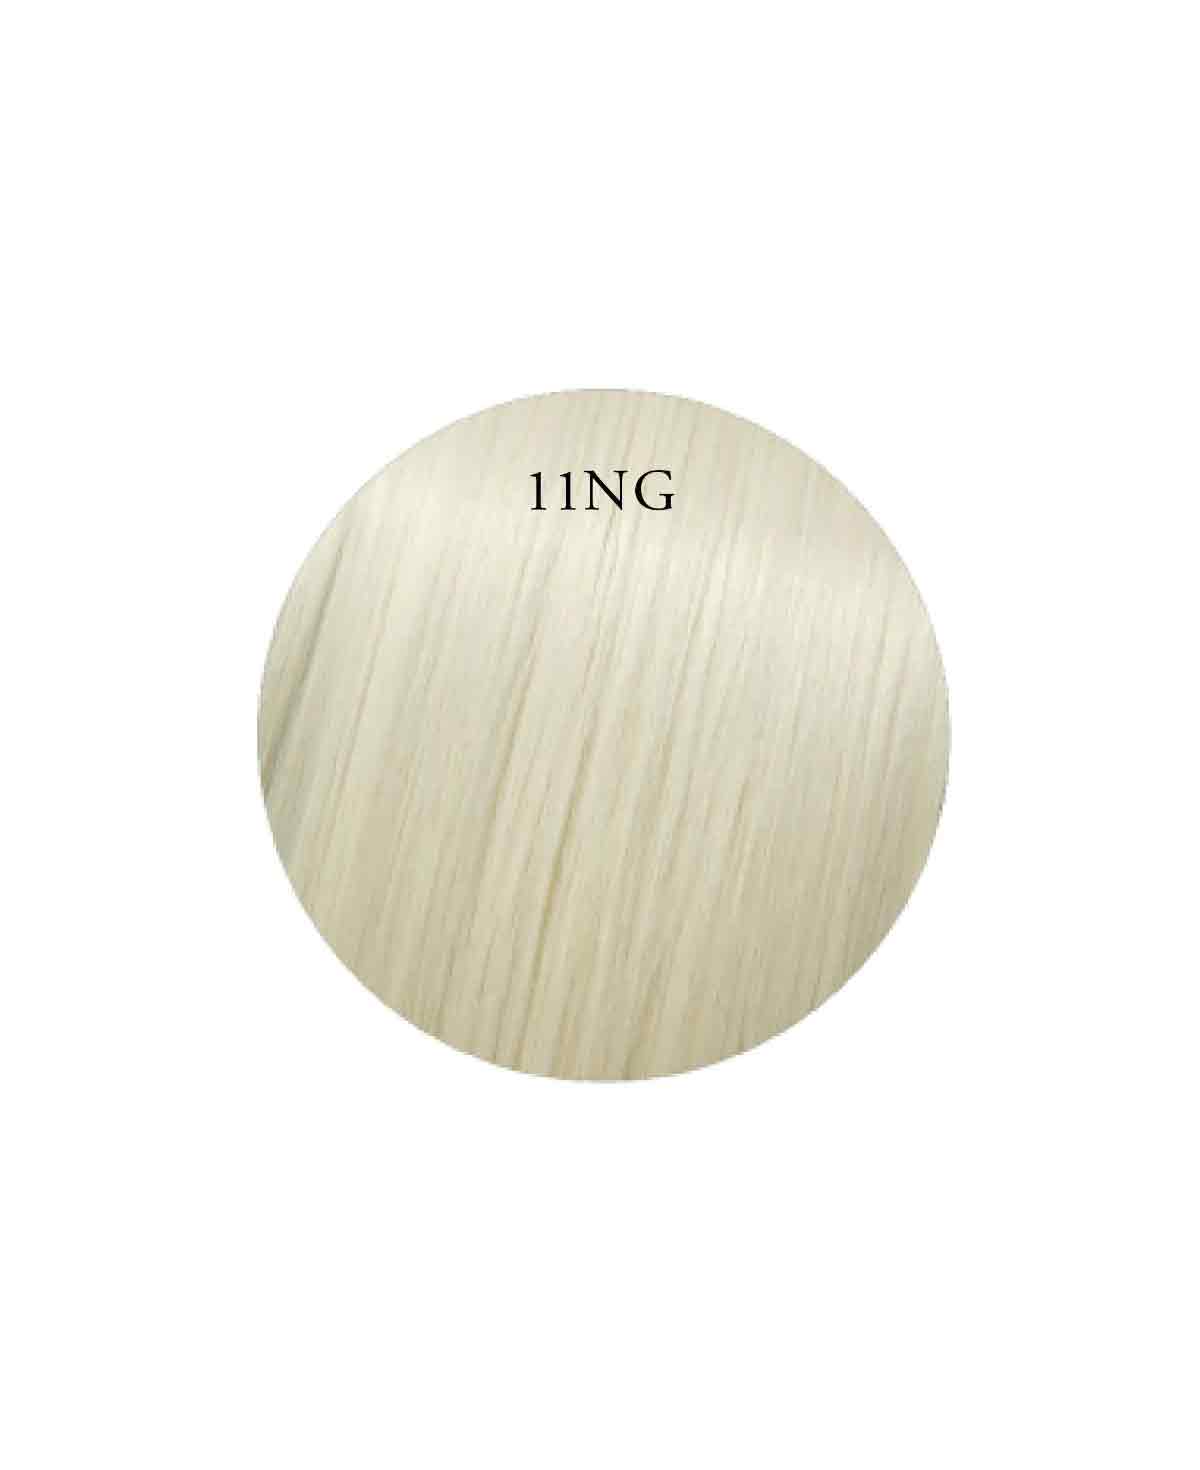 Showpony 30-35cm (14") Slim Tape Extensions - 11NG Silver Blonde